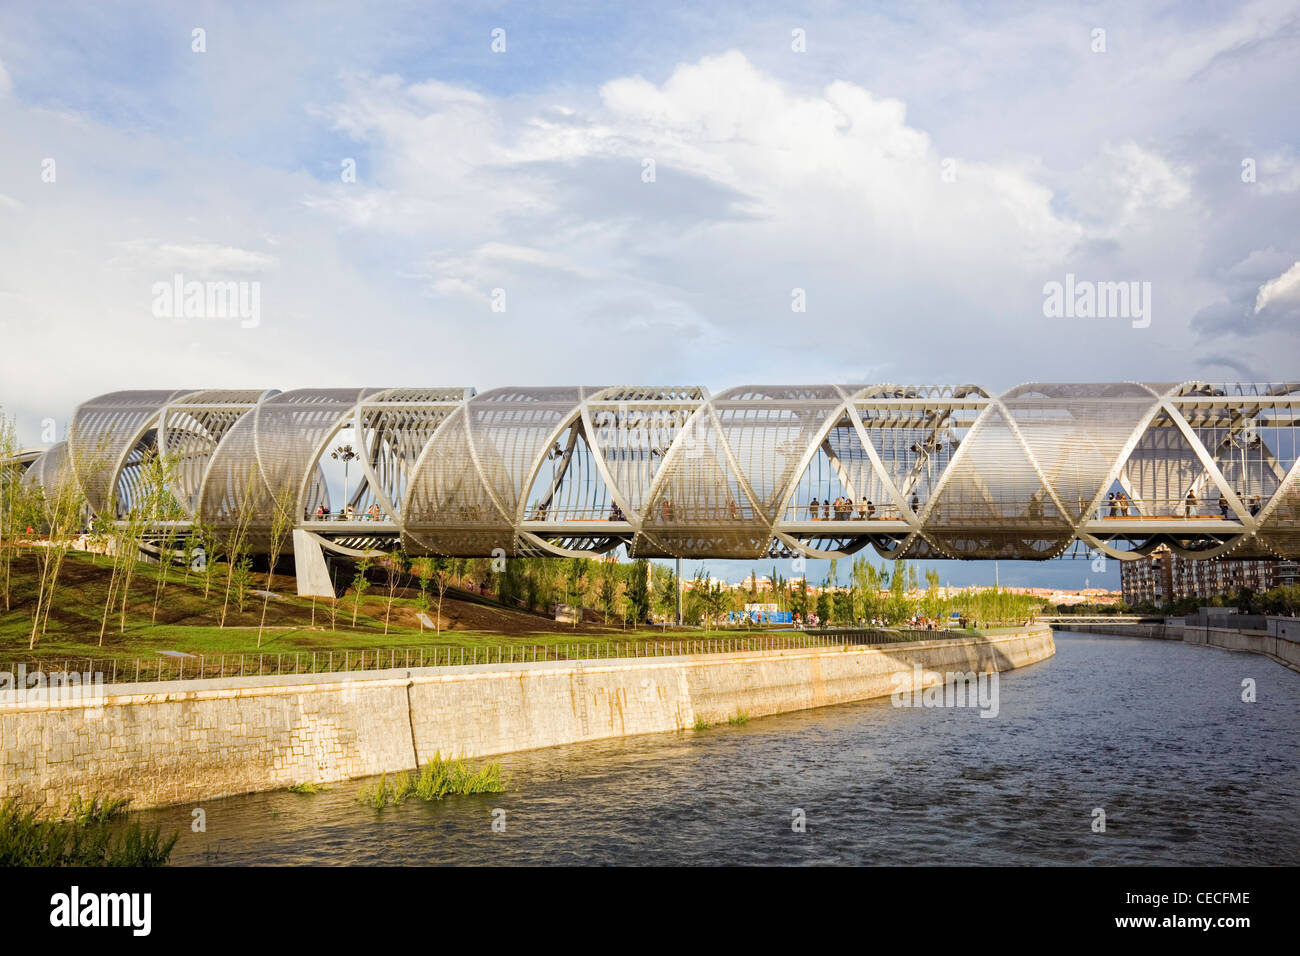 Close view of the Perrault bridge in Madrid, over the river Manzanares Stock Photo